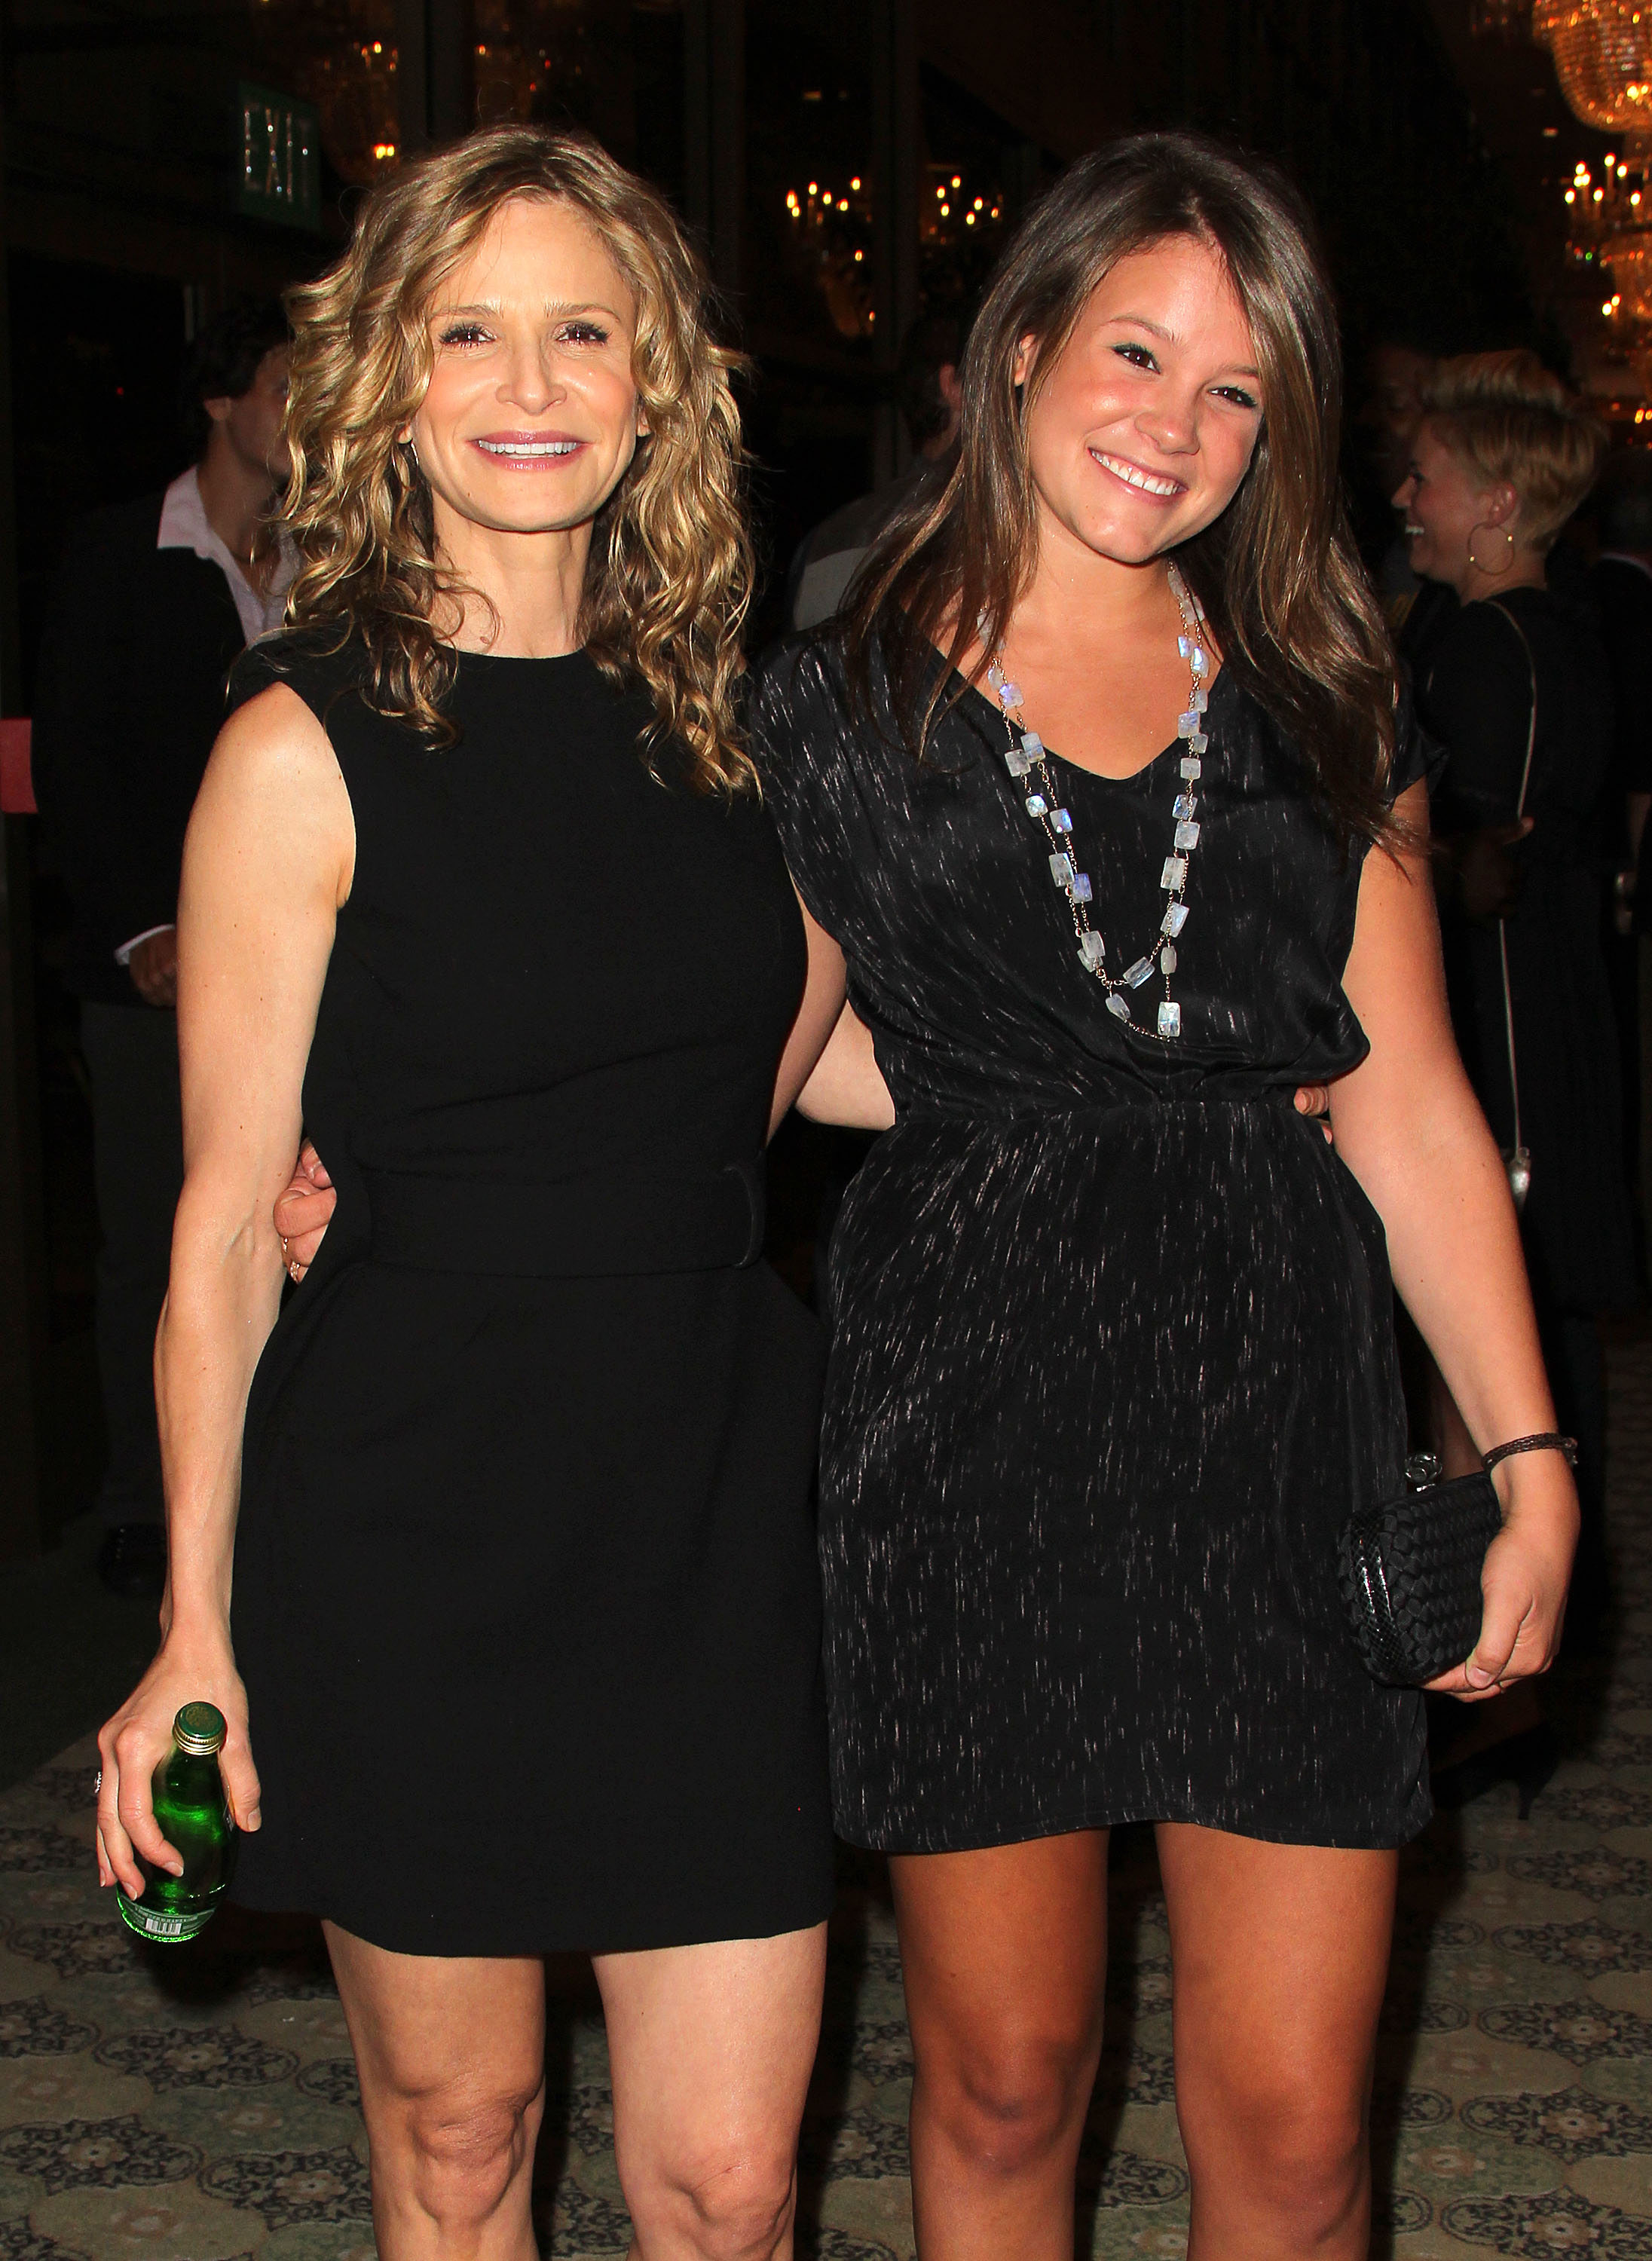 Actress Kyra Sedgwick (L) and daughter Sosie Ruth Bacon attend "The Closer" Celebrates Its 100th Espisode at the Sheraton Universal Hotel on August 27, 2011 in Universal City, California | Source: Getty Images